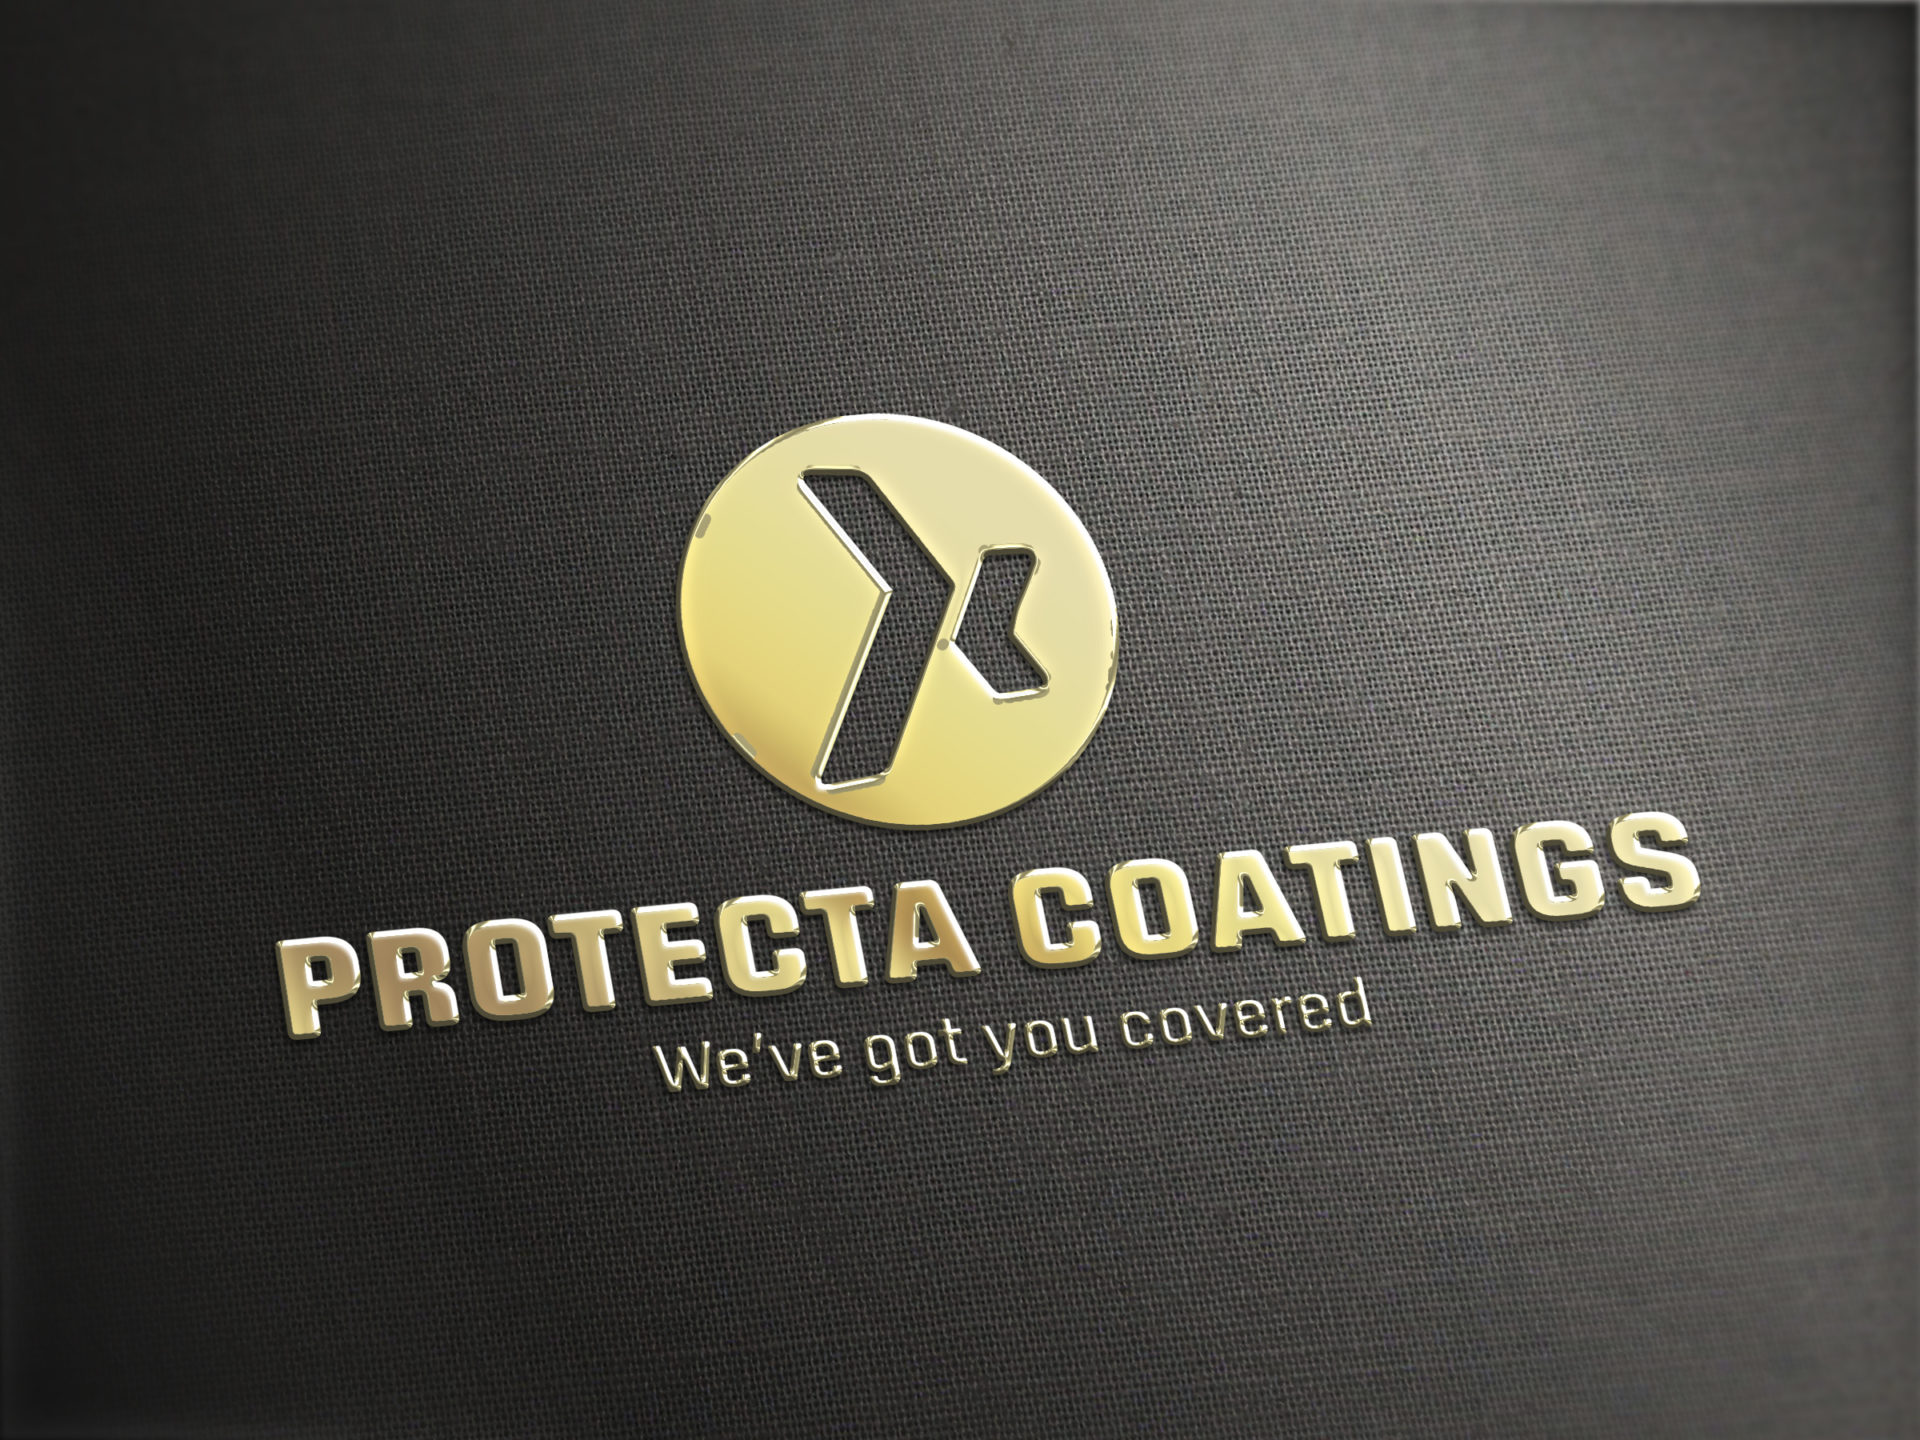 Logo Making made easy for Protecta Coatings in Rolleston, Christchurch. Logo Design made by XDC.NZ, the super experienced Logo Designer based in Christchurch & Rolleston Selwyn NZ. Call Clint now on 021 11 44 014